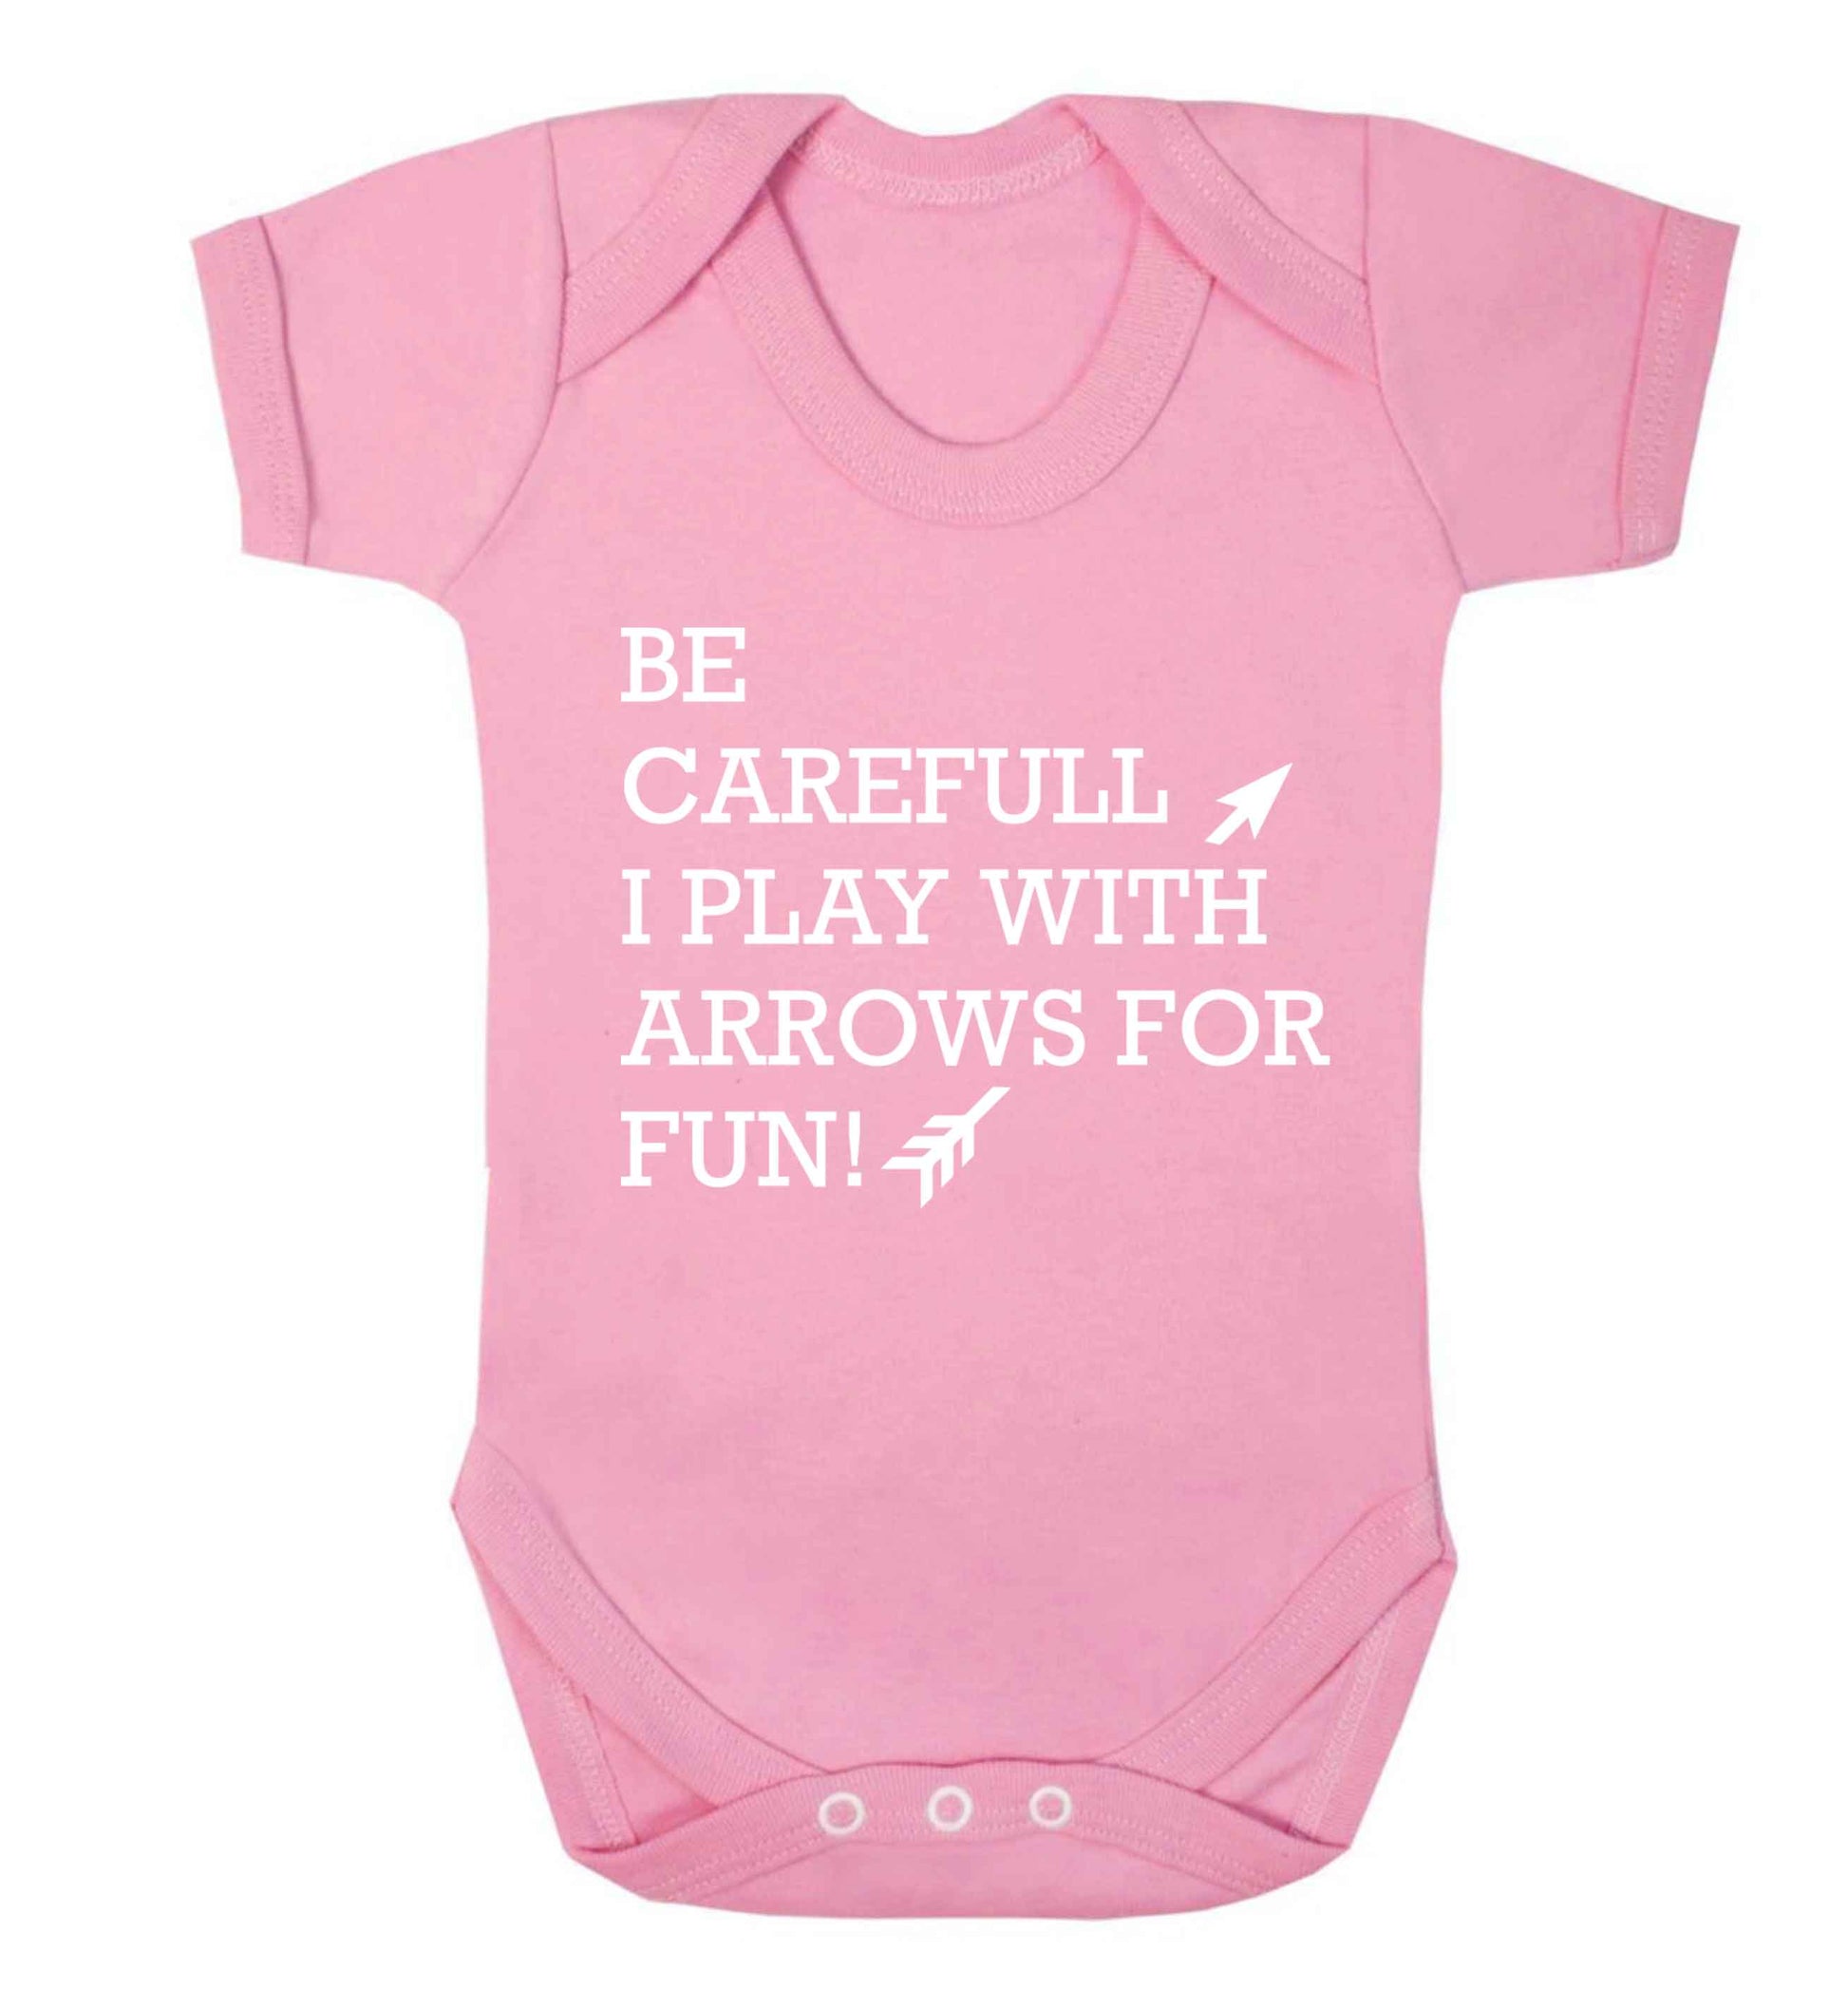 Be carefull I play with arrows for fun Baby Vest pale pink 18-24 months